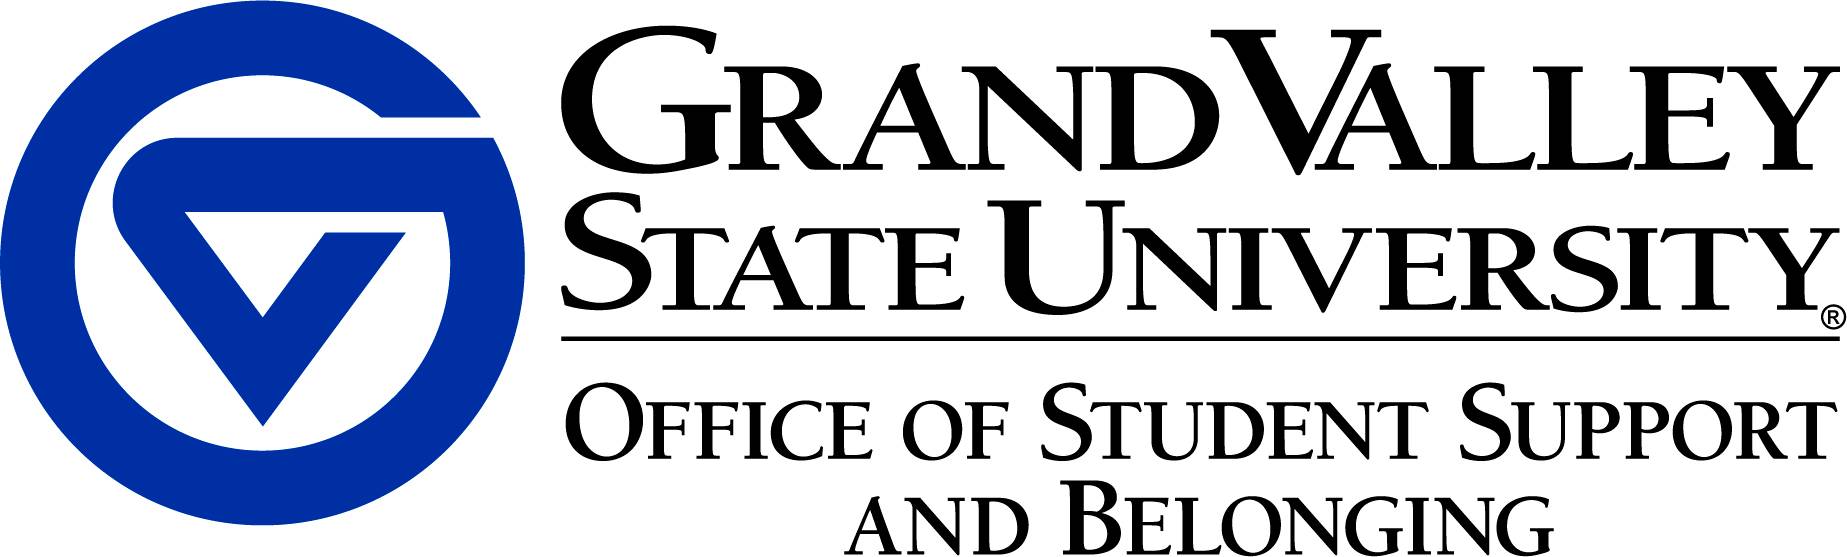 Grand Valley State University: Office of Student Support and Belonging